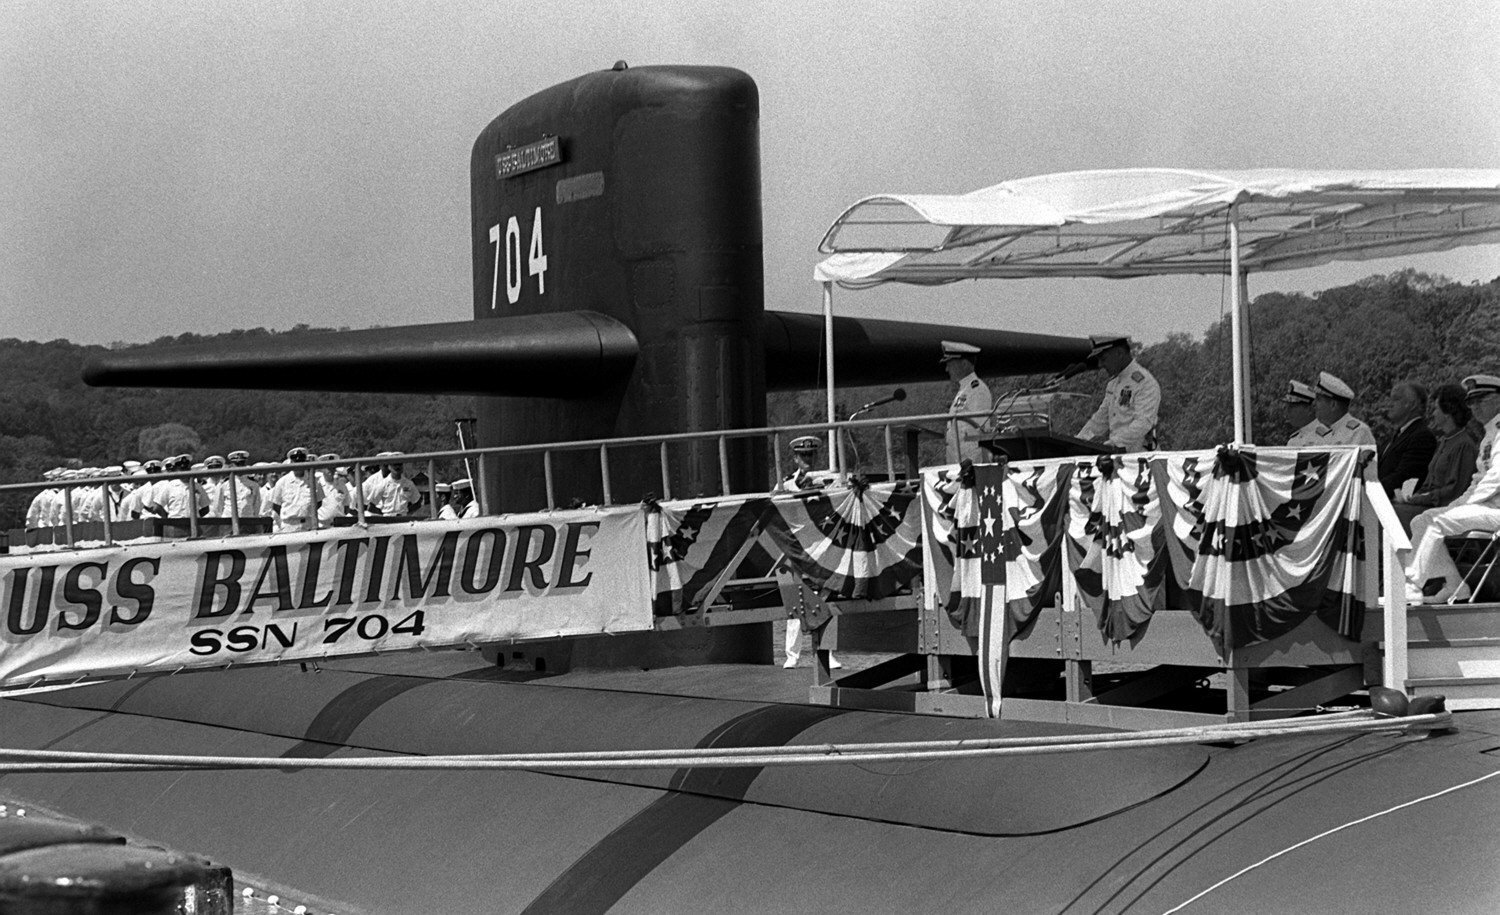 uss baltimore ssn-704 commissioning